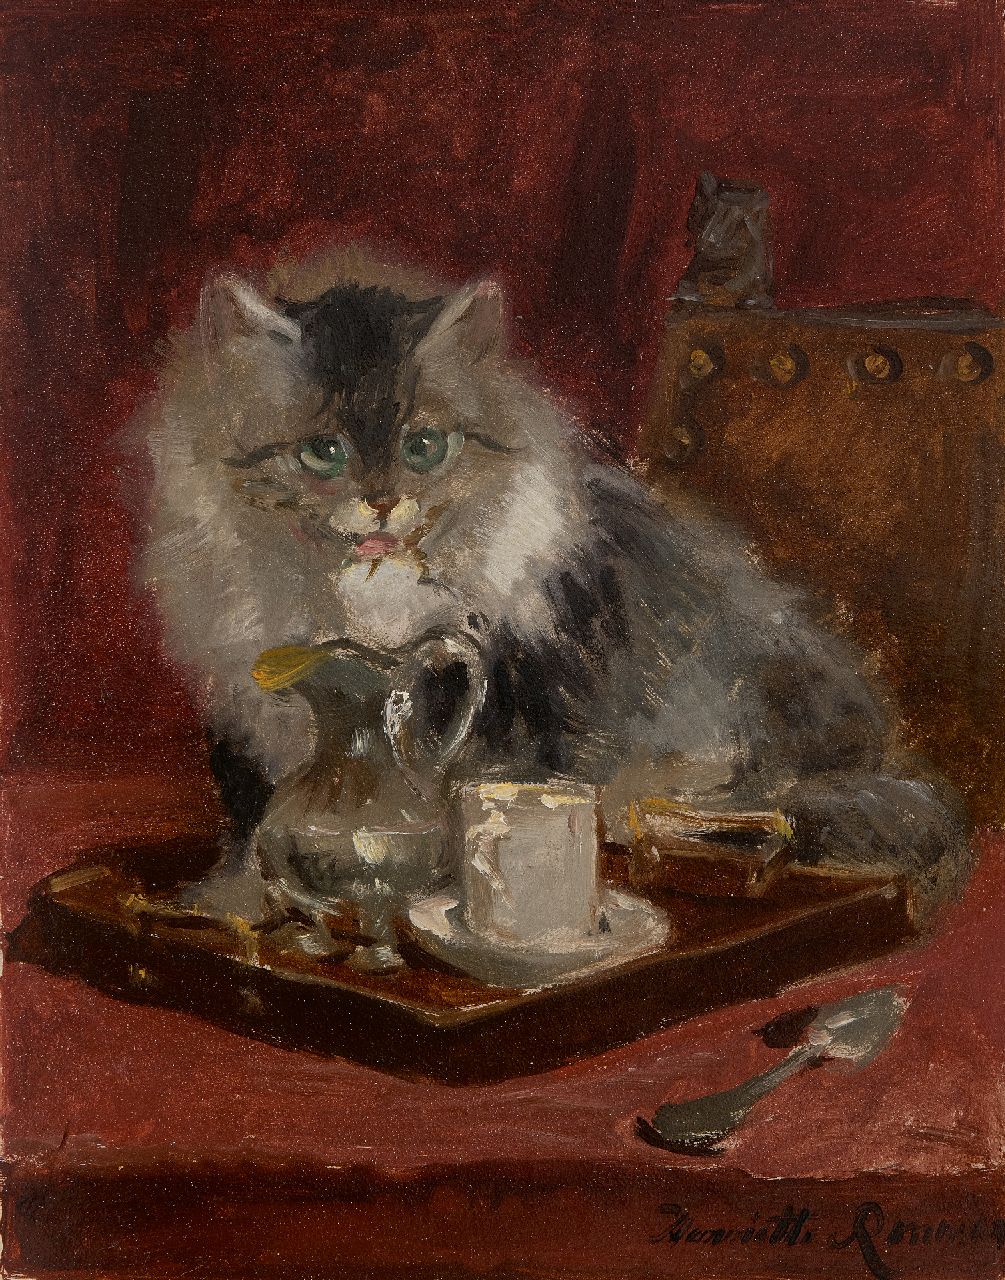 Ronner-Knip H.  | Henriette Ronner-Knip, Cat at tray with jug and cup, oil on painter's board 31.9 x 25.6 cm, signed l.r.